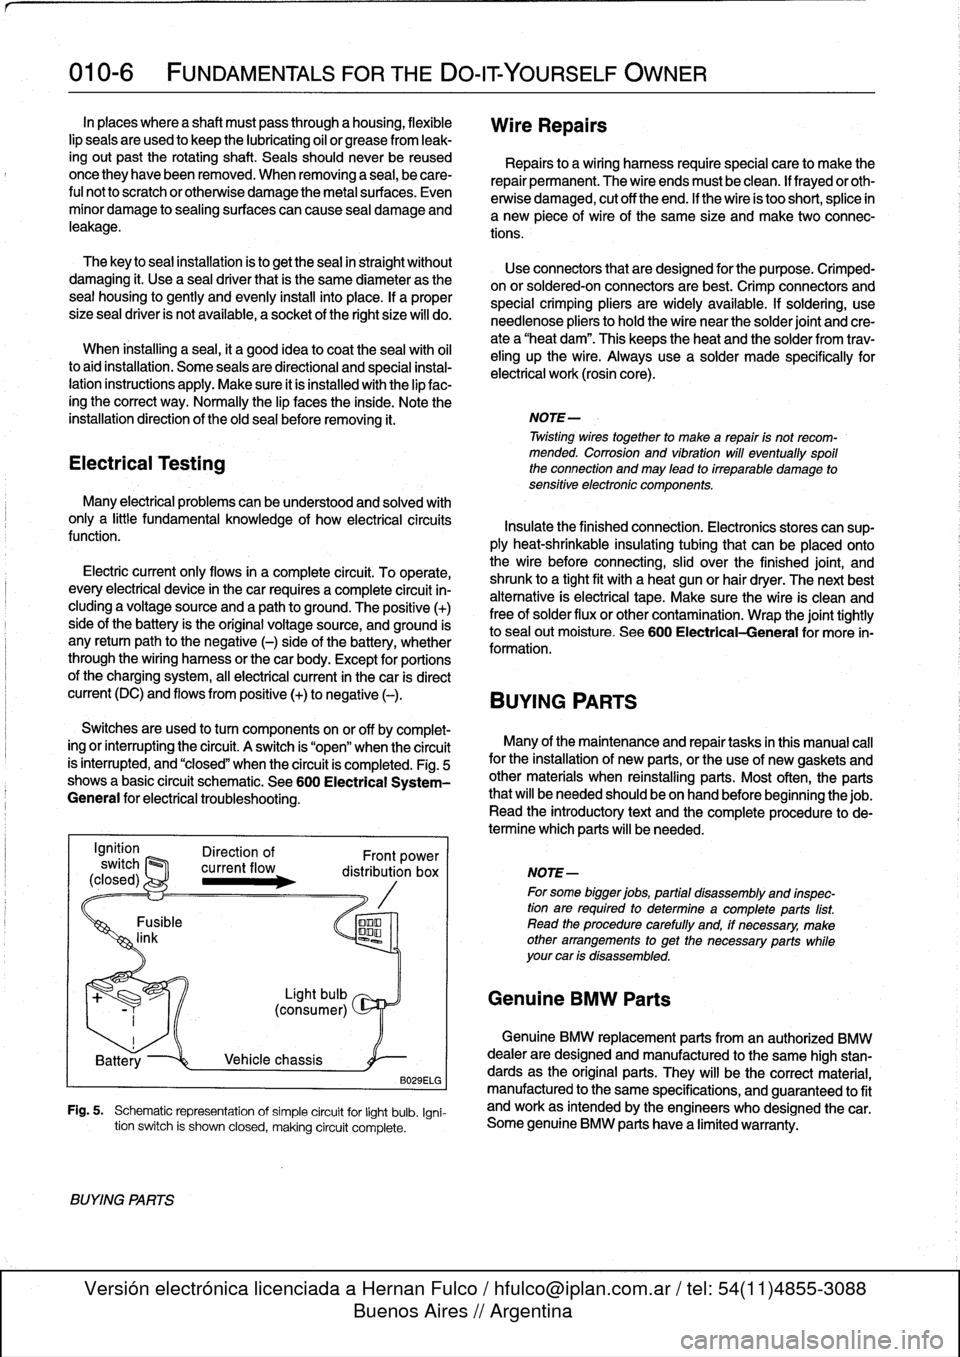 BMW 318i 1996 E36 Workshop Manual 
010-
6

	

FUNDAMENTALS
FOR
THE
DO-ITYOURSELF
OWNER

In
places
where
a
shaft
mustpass
through
a
housing,
flexible
lip
seals
areused
to
keep
the
lubricating
oil
or
grease
from
leak-

ingout
past
the
r